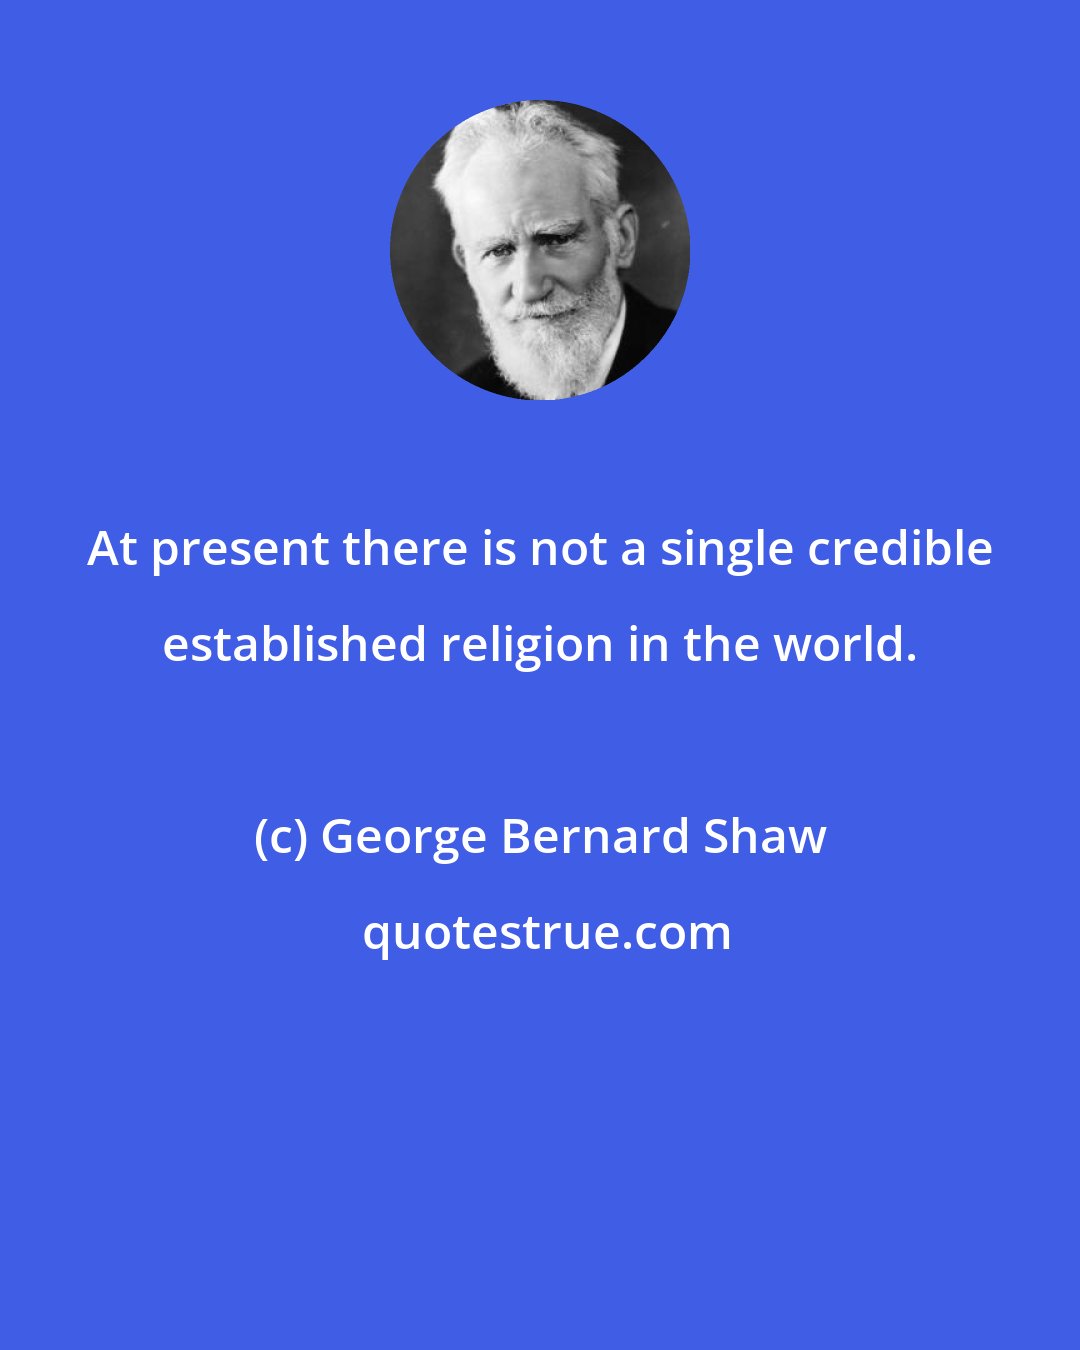 George Bernard Shaw: At present there is not a single credible established religion in the world.